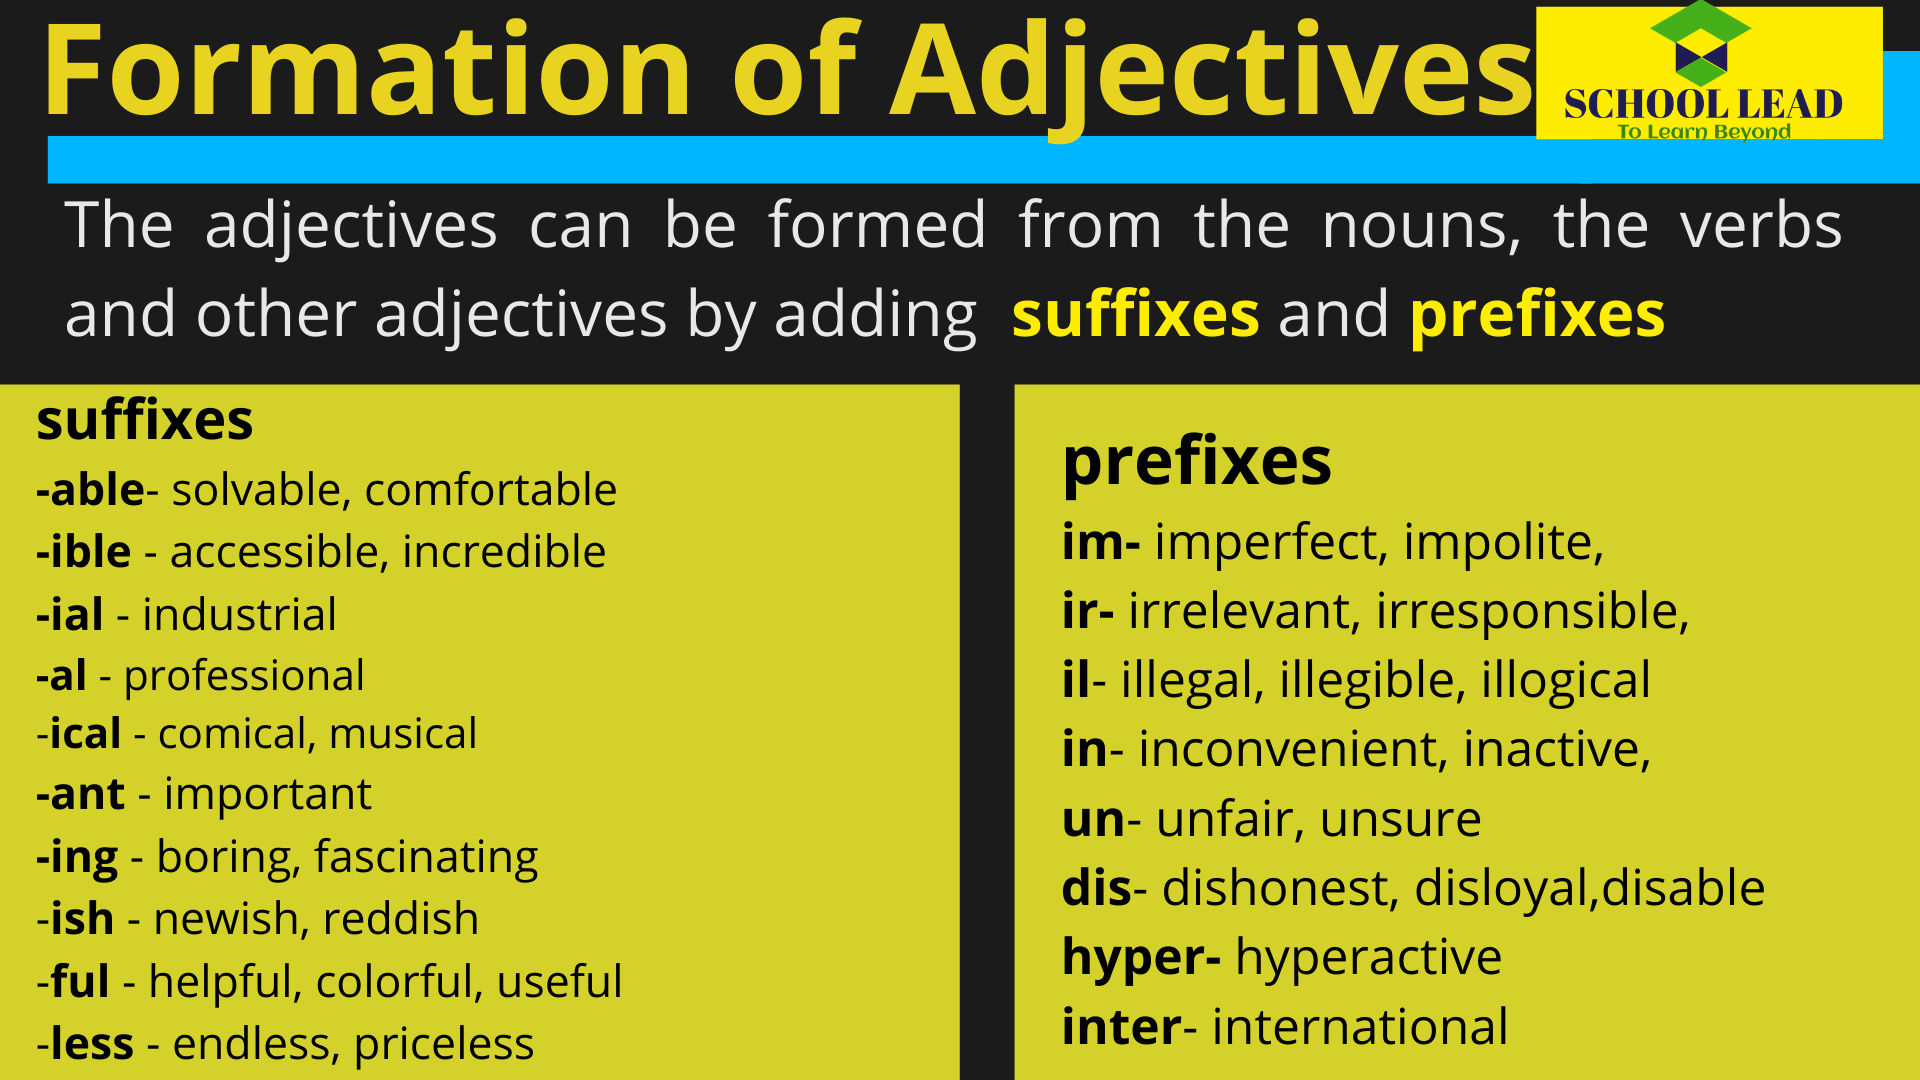 Formation Of Adjectives School Lead